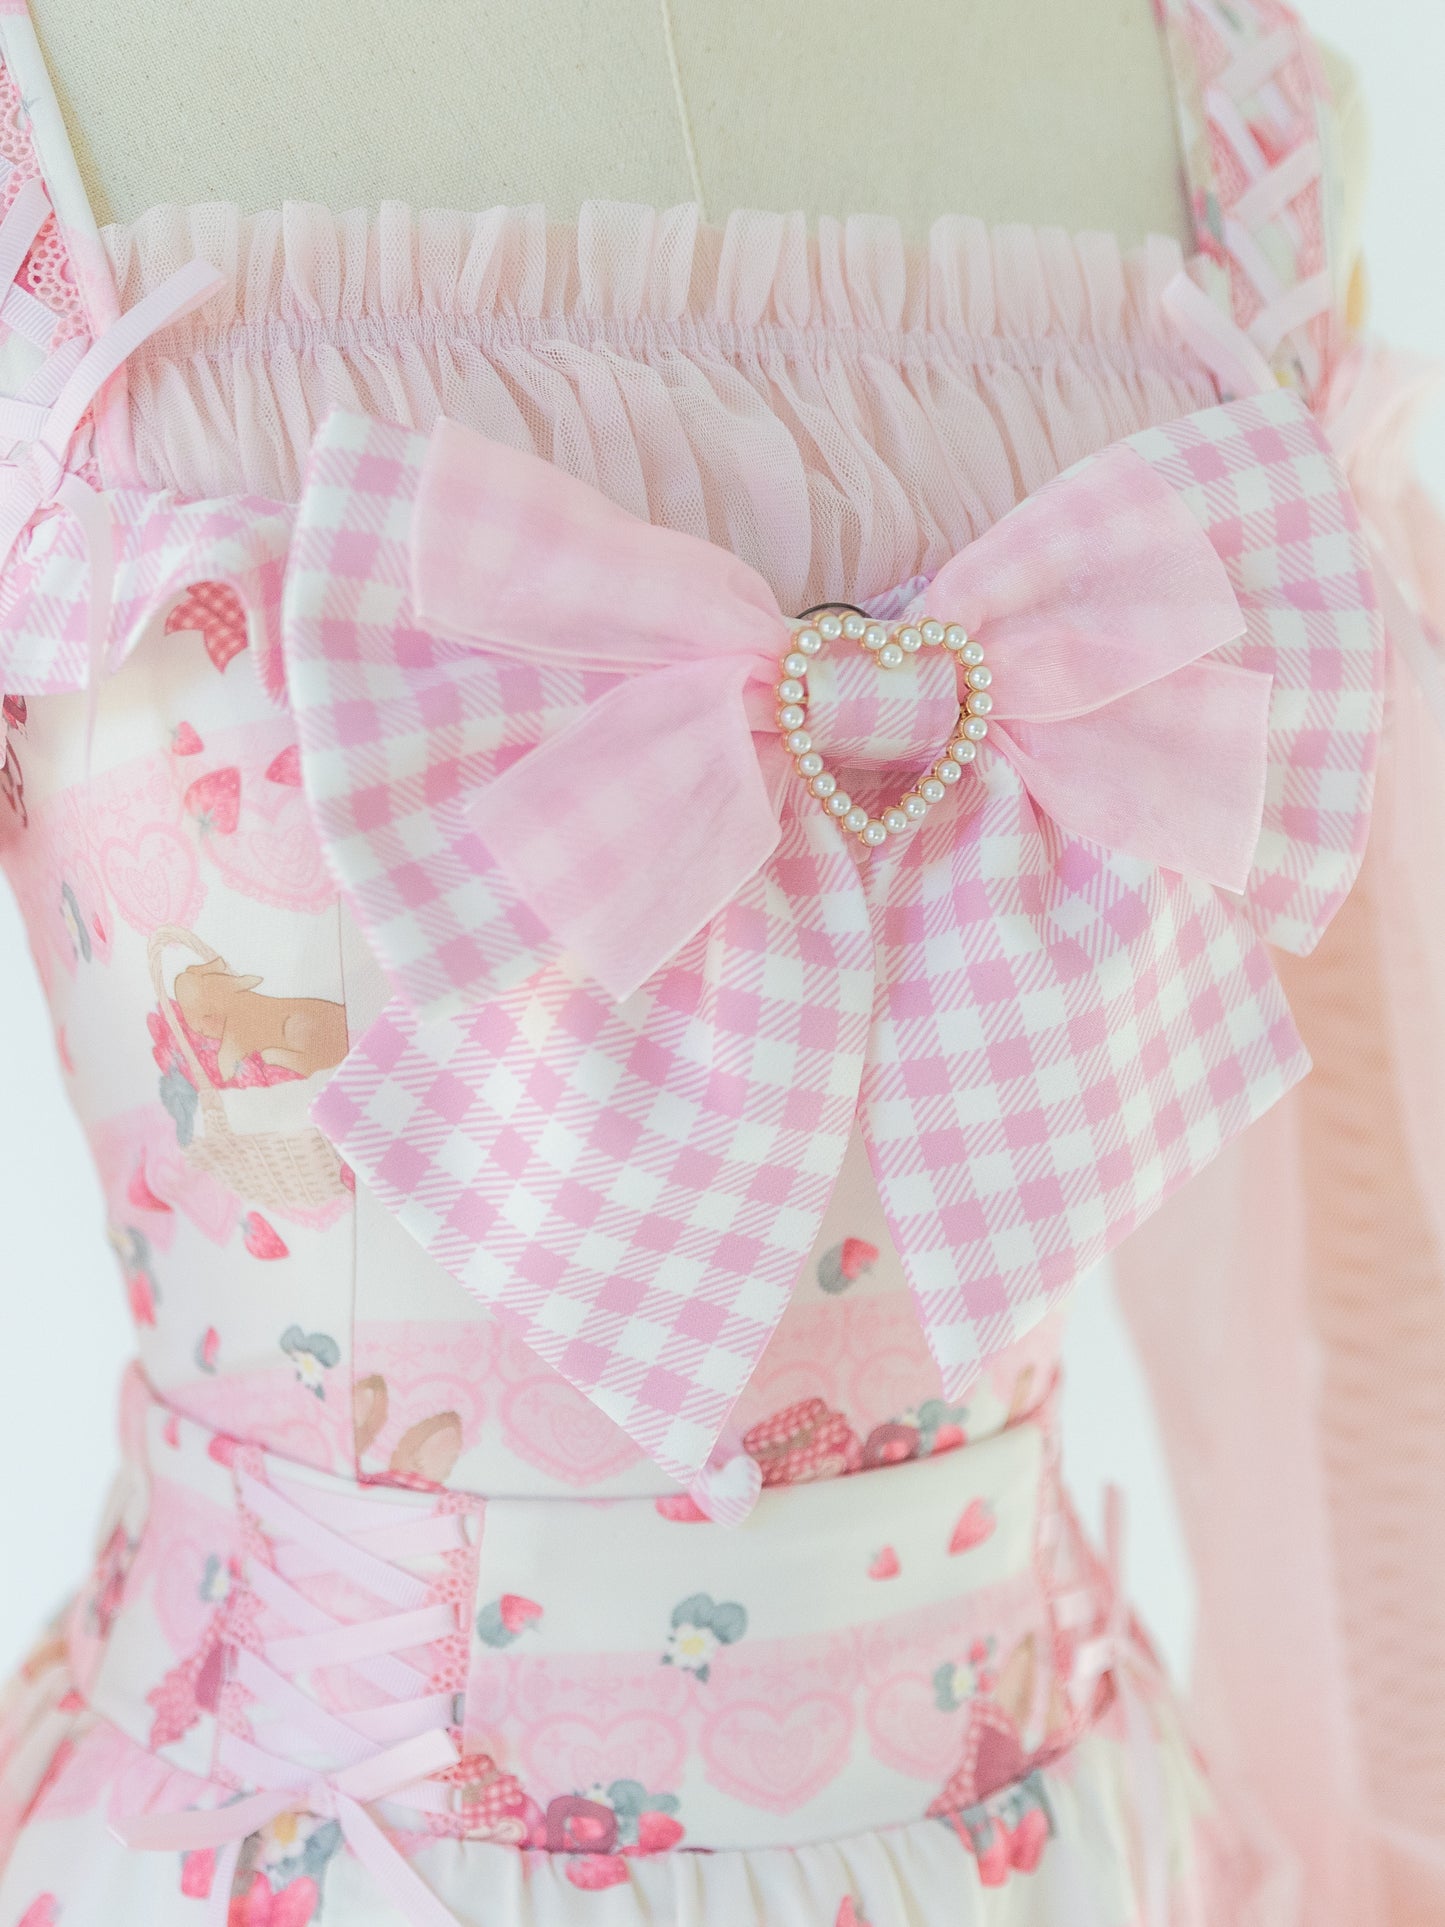 Gingham heart hairbow/pin [Strawberry Bunny]